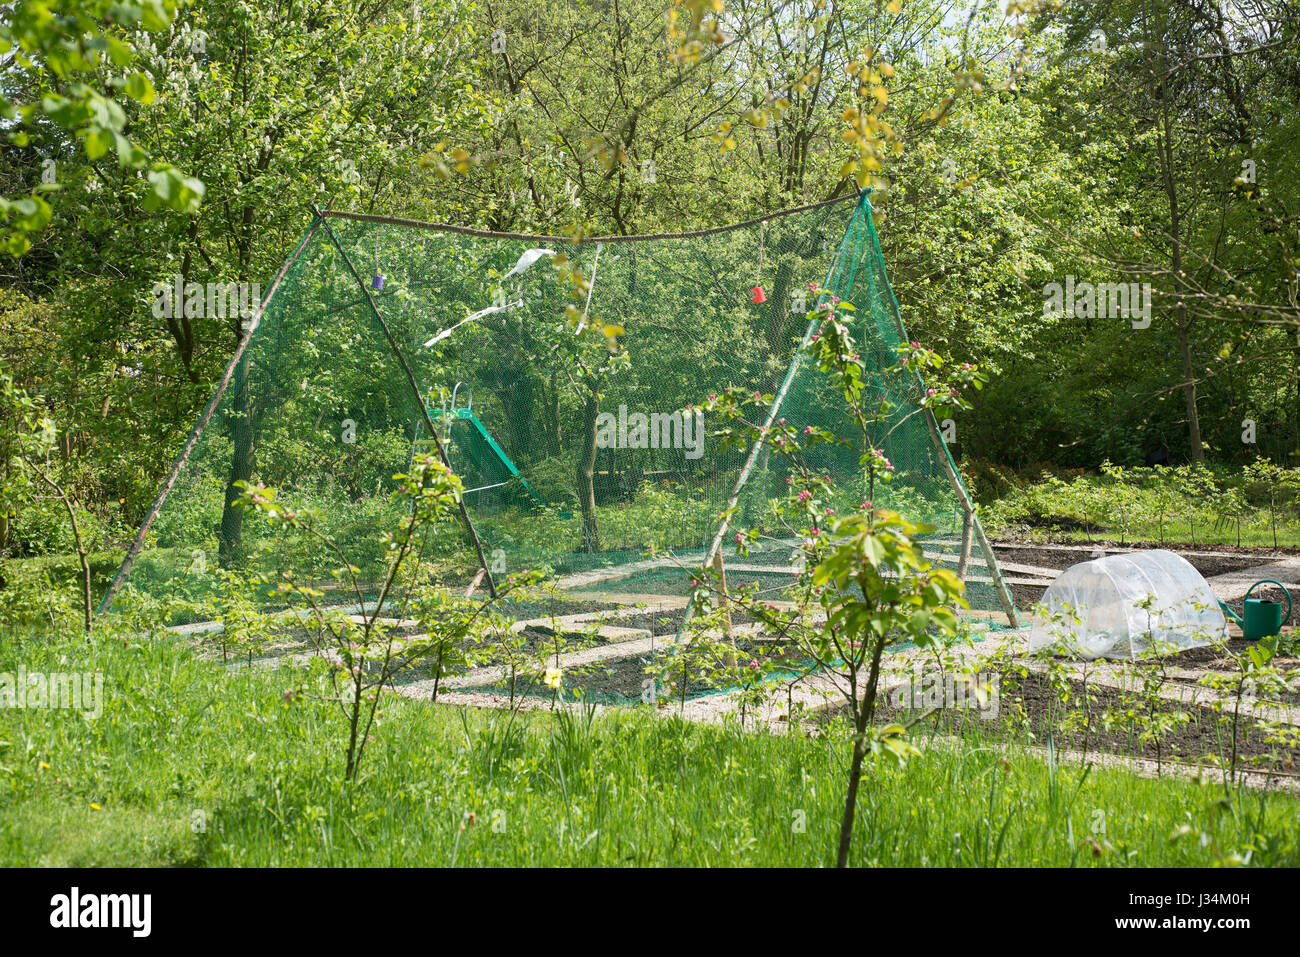 Vegetables protected by a netting structure in the garden, Chipping, Preston, Lancashire. Stock Photo